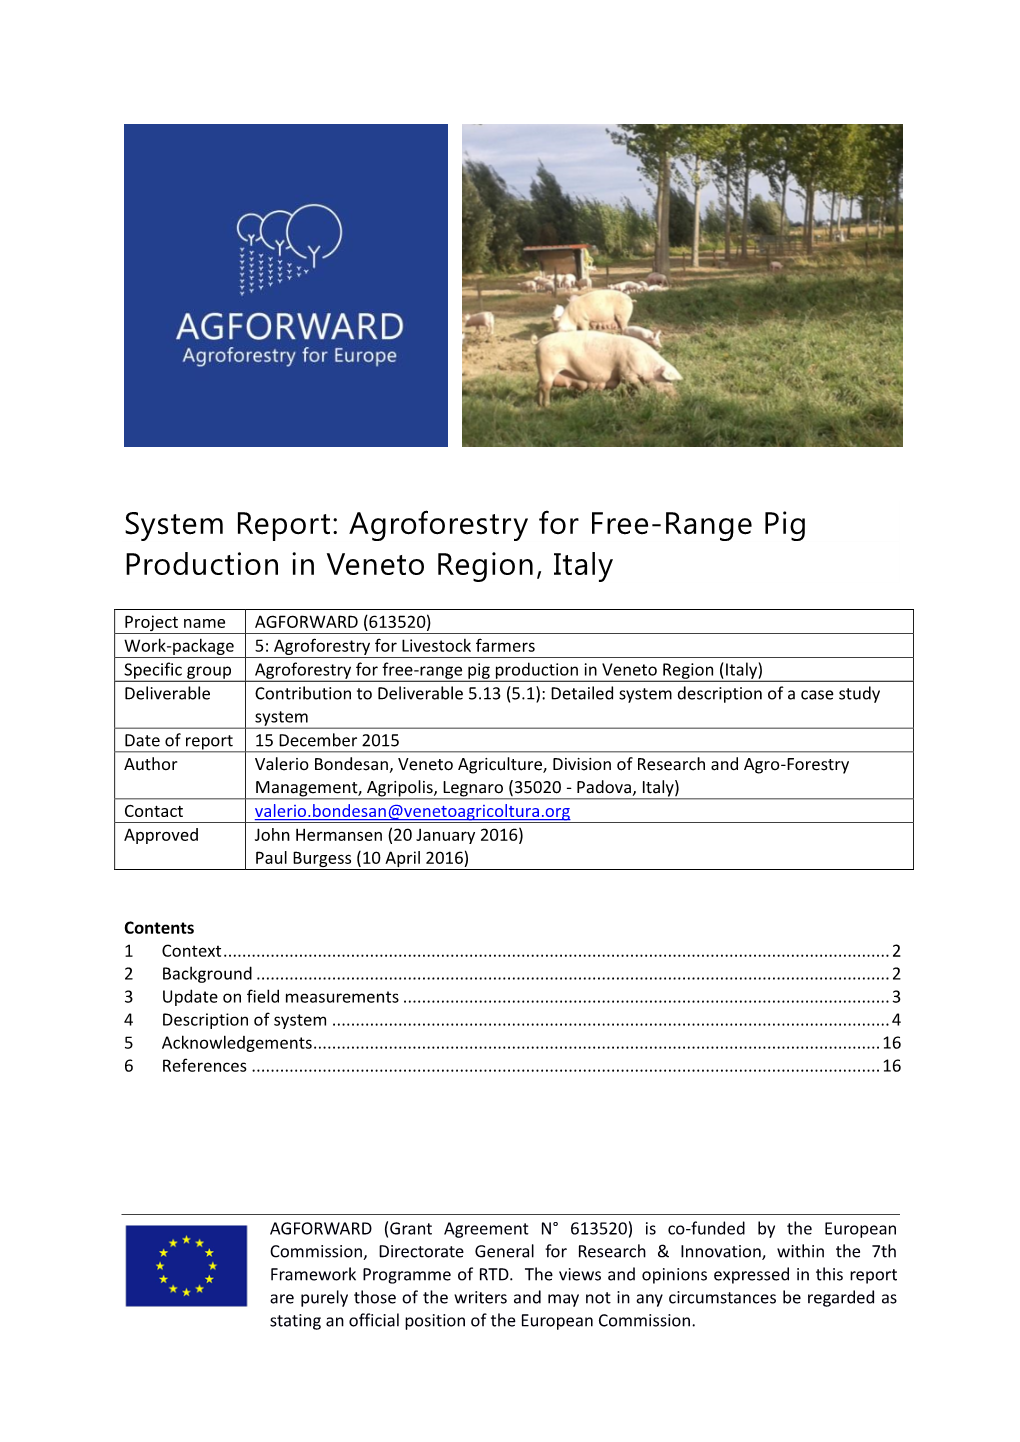 System Report: Agroforestry for Free-Range Pig Production in Veneto Region, Italy